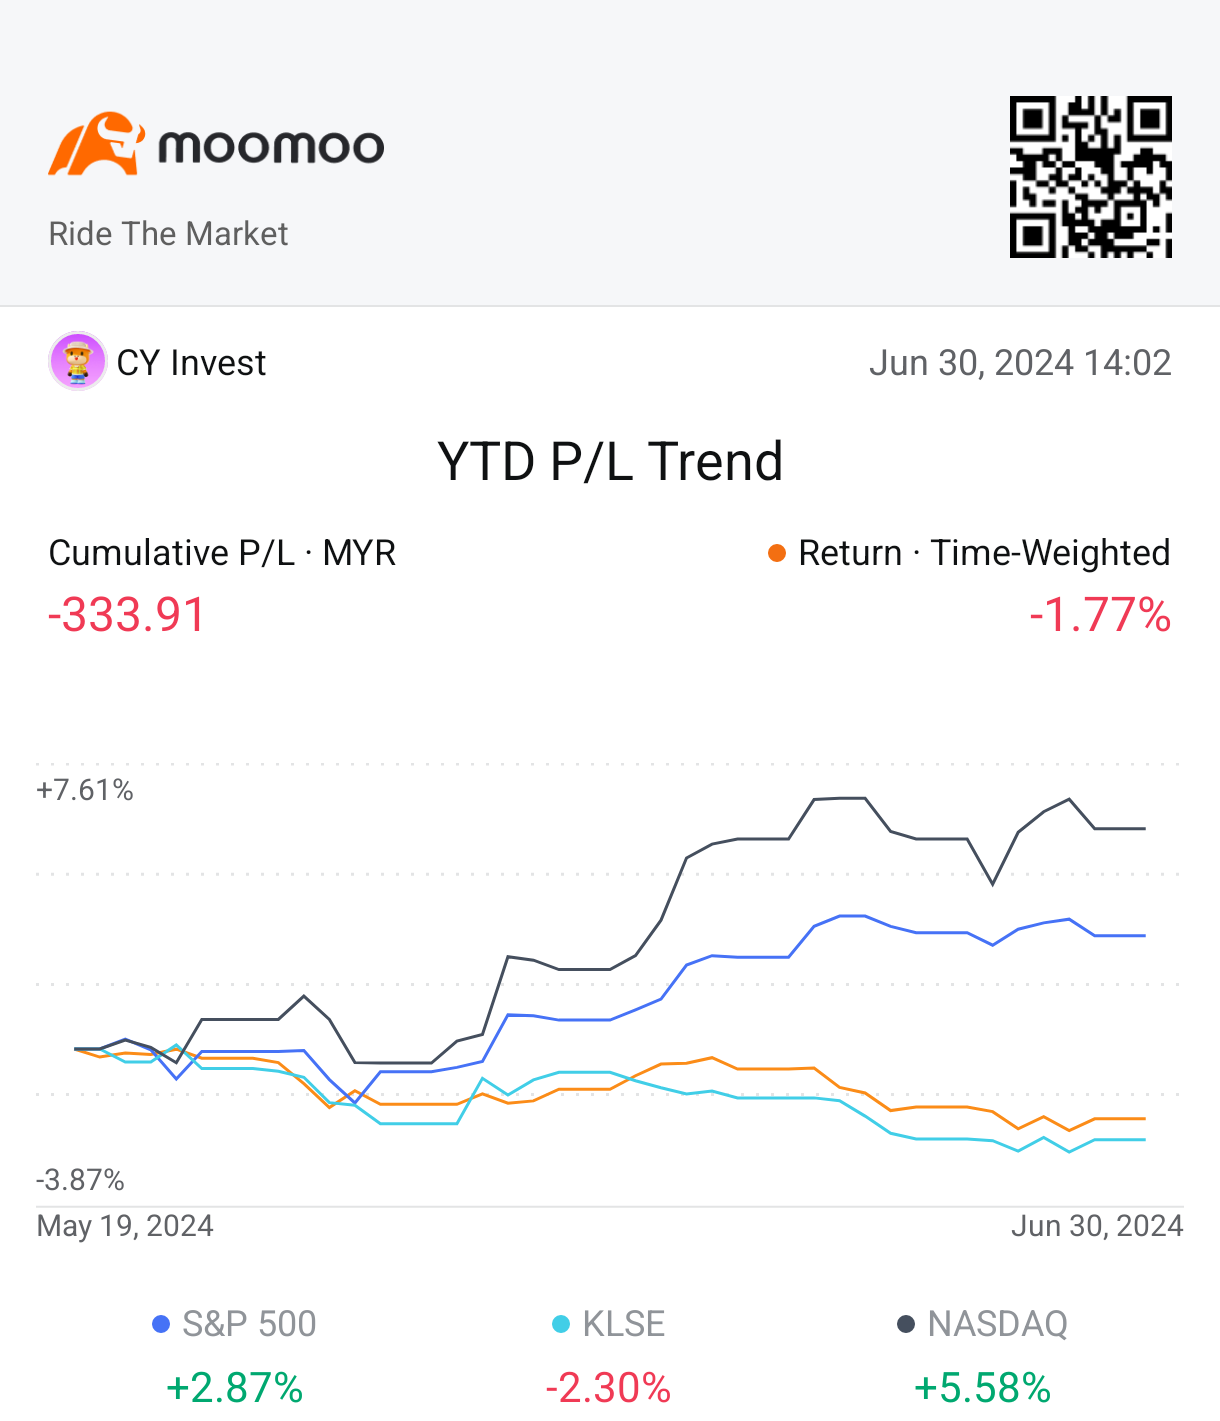 Only start using moomoo for 1.5 months and still learning how to invest.